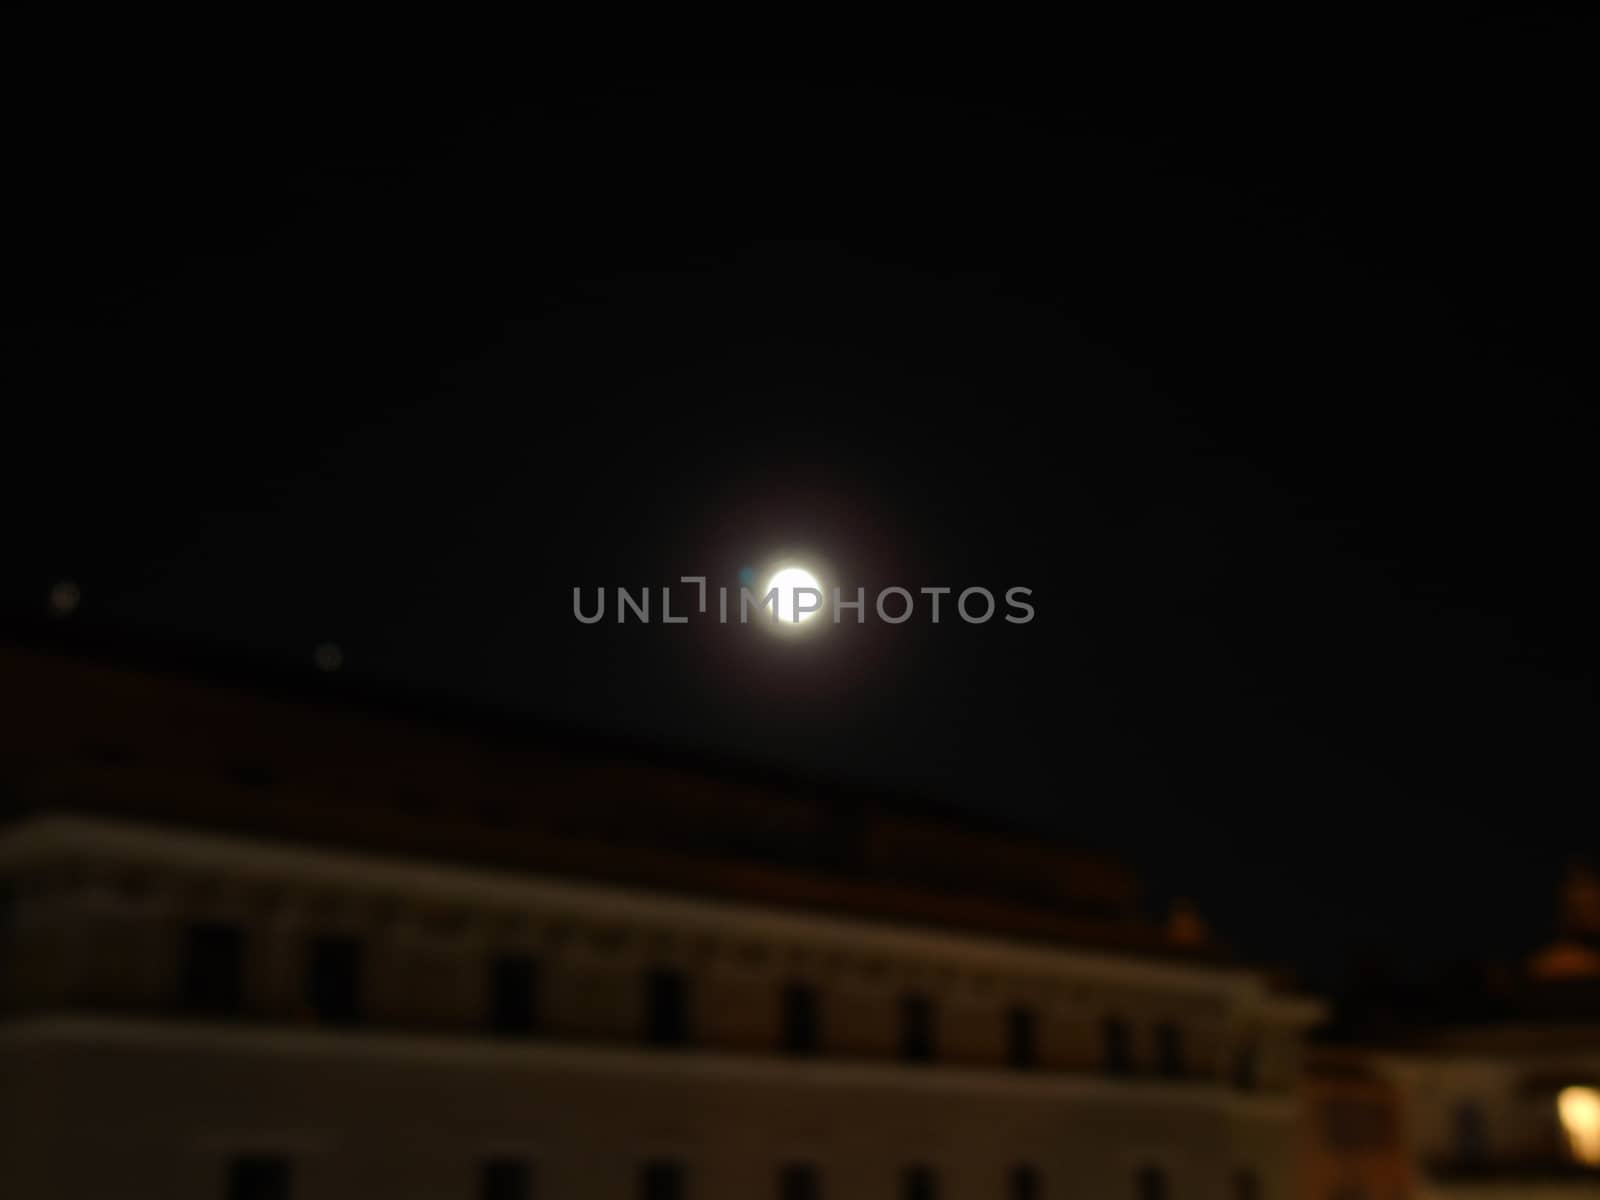 Genova, Italy - 07/05/2020: An amazing photography of the full moon over the city of Genova by night with a great clear and blue sky in the background and some stars.